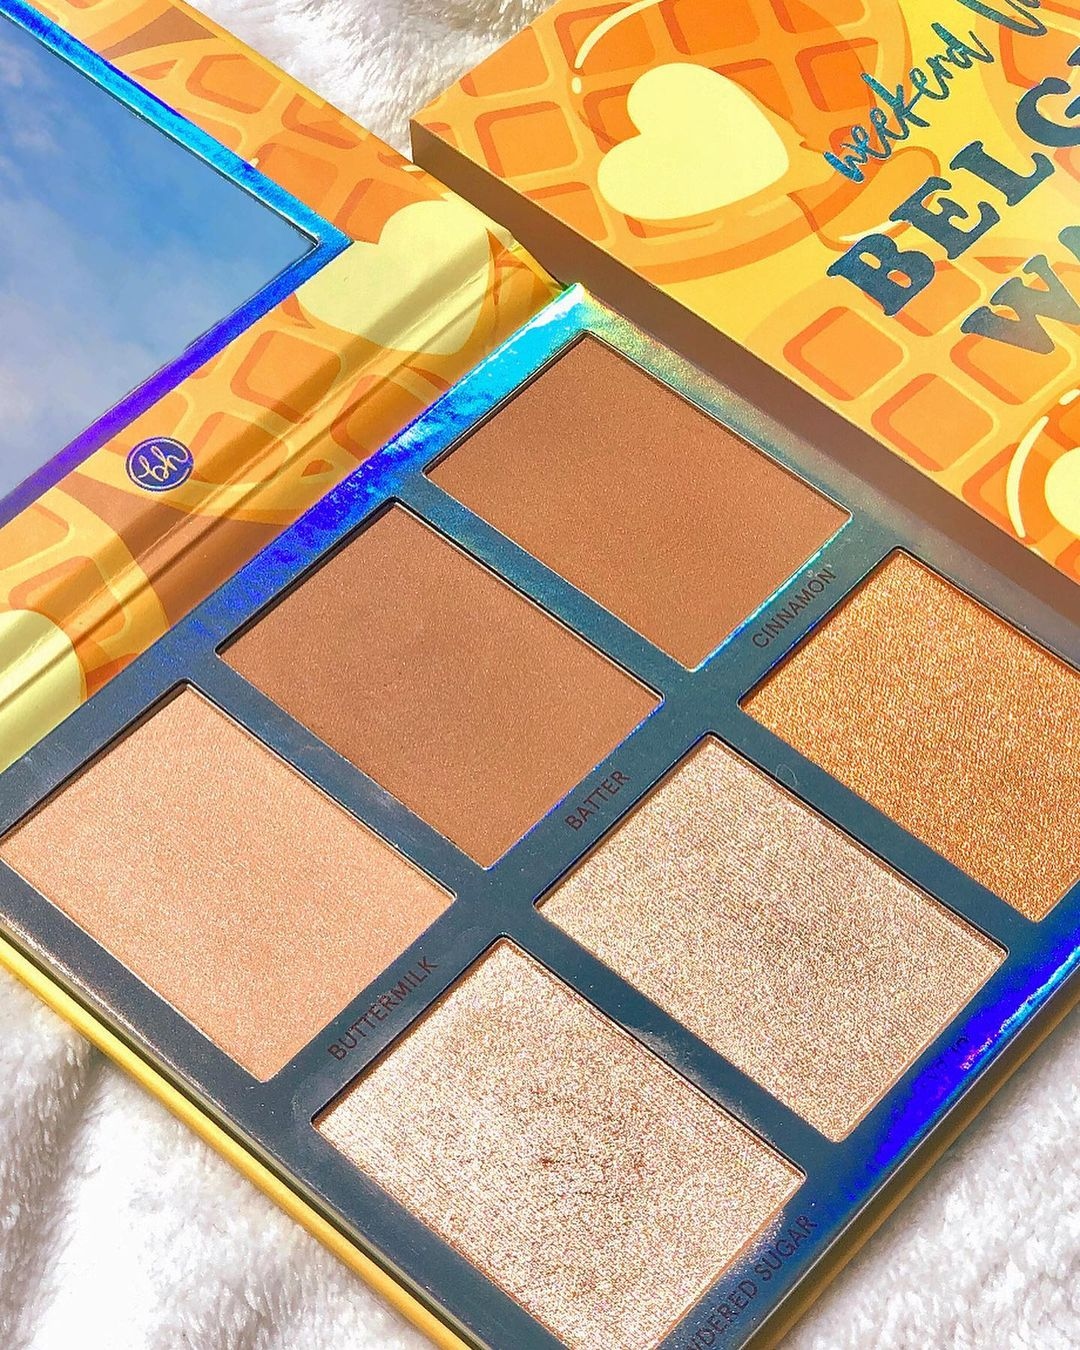 Egypten Statistikker Donation BH Cosmetics on Twitter: "No syrup needed 🧇⁠ 🍴: Belgian Waffle - 6 Color  Baked Bronzer &amp; Highlighter Palette 📸: @paint.my.face #weekendvibes # bhcosmetics https://t.co/sz3xofpmwa https://t.co/NygV6E5mVj" / Twitter